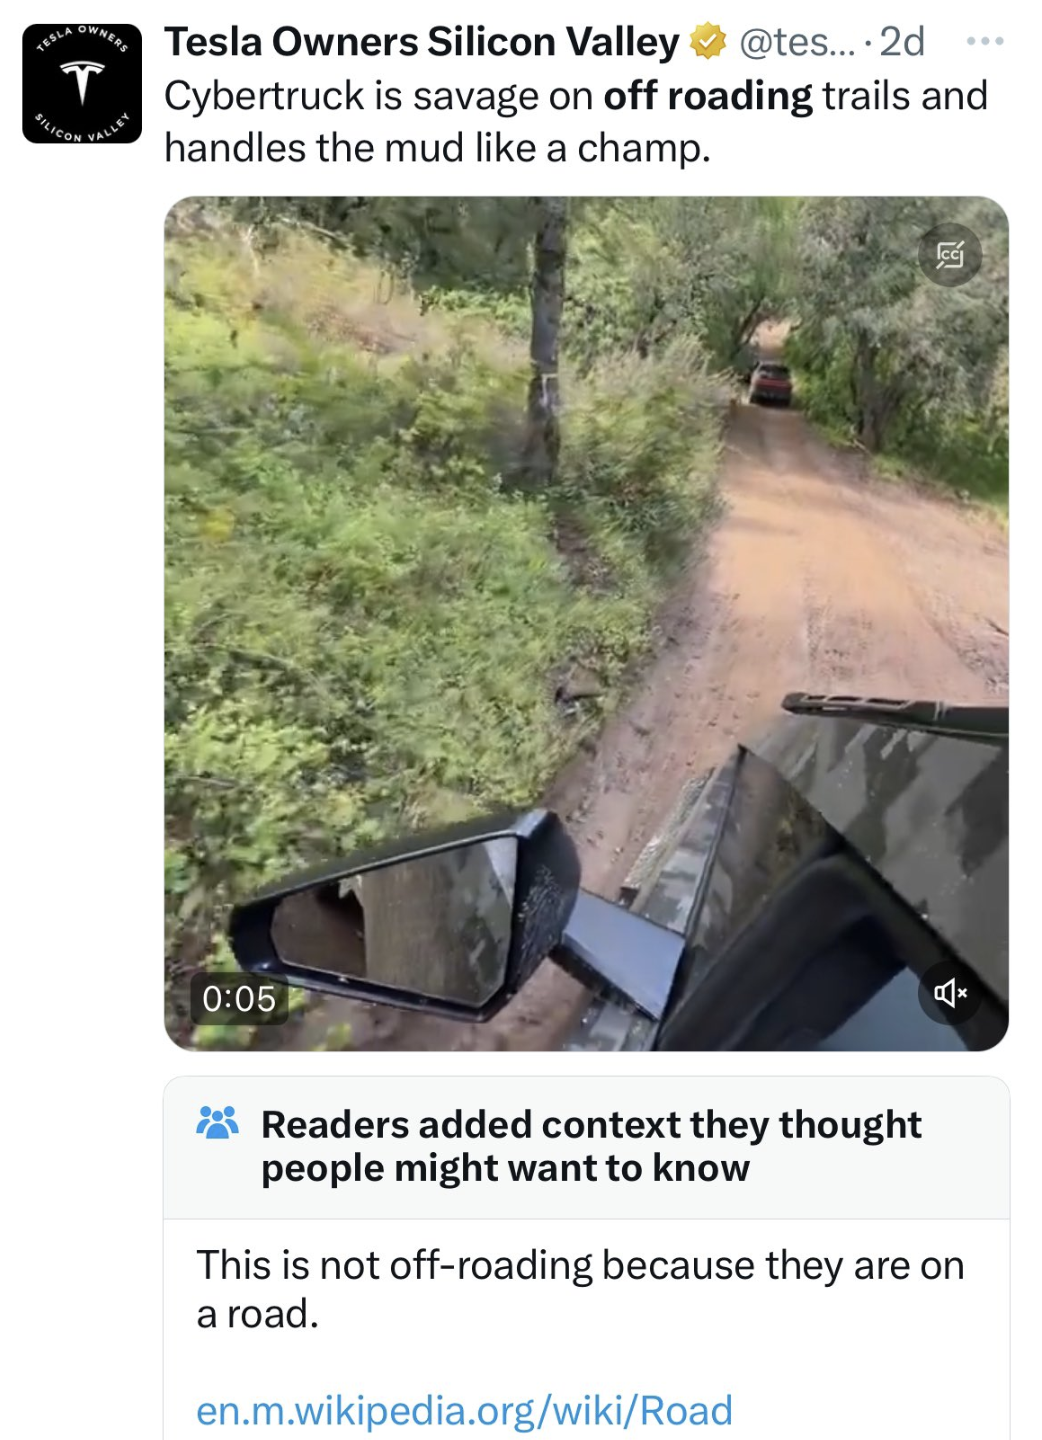 dirt road - Tesla Owners Silicon Valley .... 2d Cybertruck is savage on off roading trails and handles the mud a champ. Readers added context they thought people might want to know This is not offroading because they are on a road. en.m.wikipedia.orgwikiR